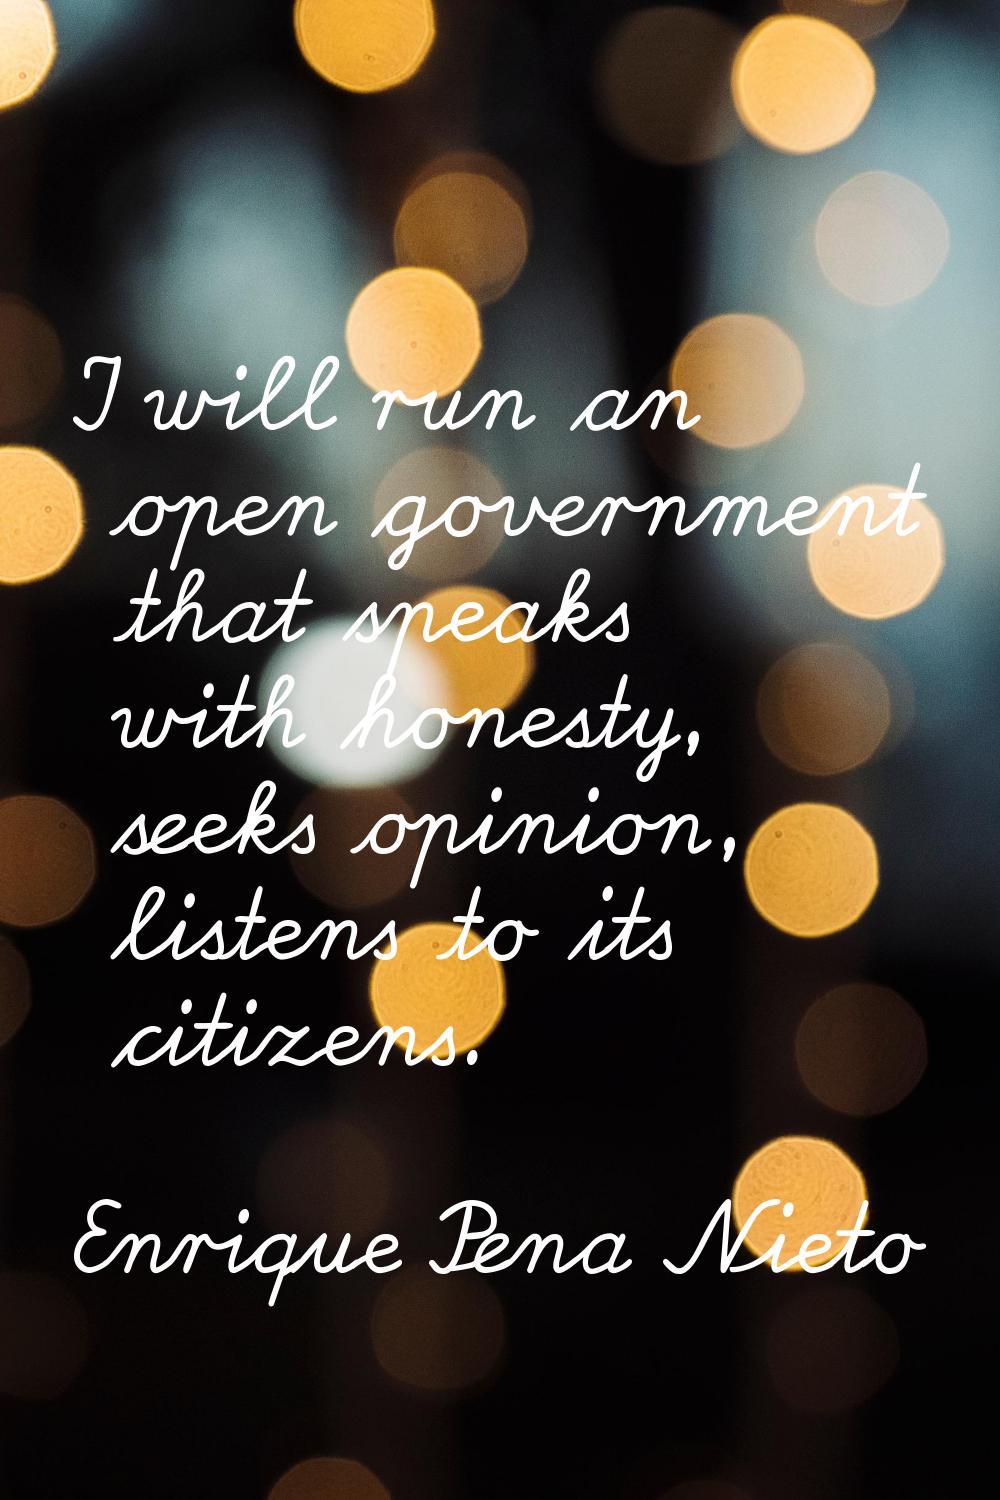 I will run an open government that speaks with honesty, seeks opinion, listens to its citizens.